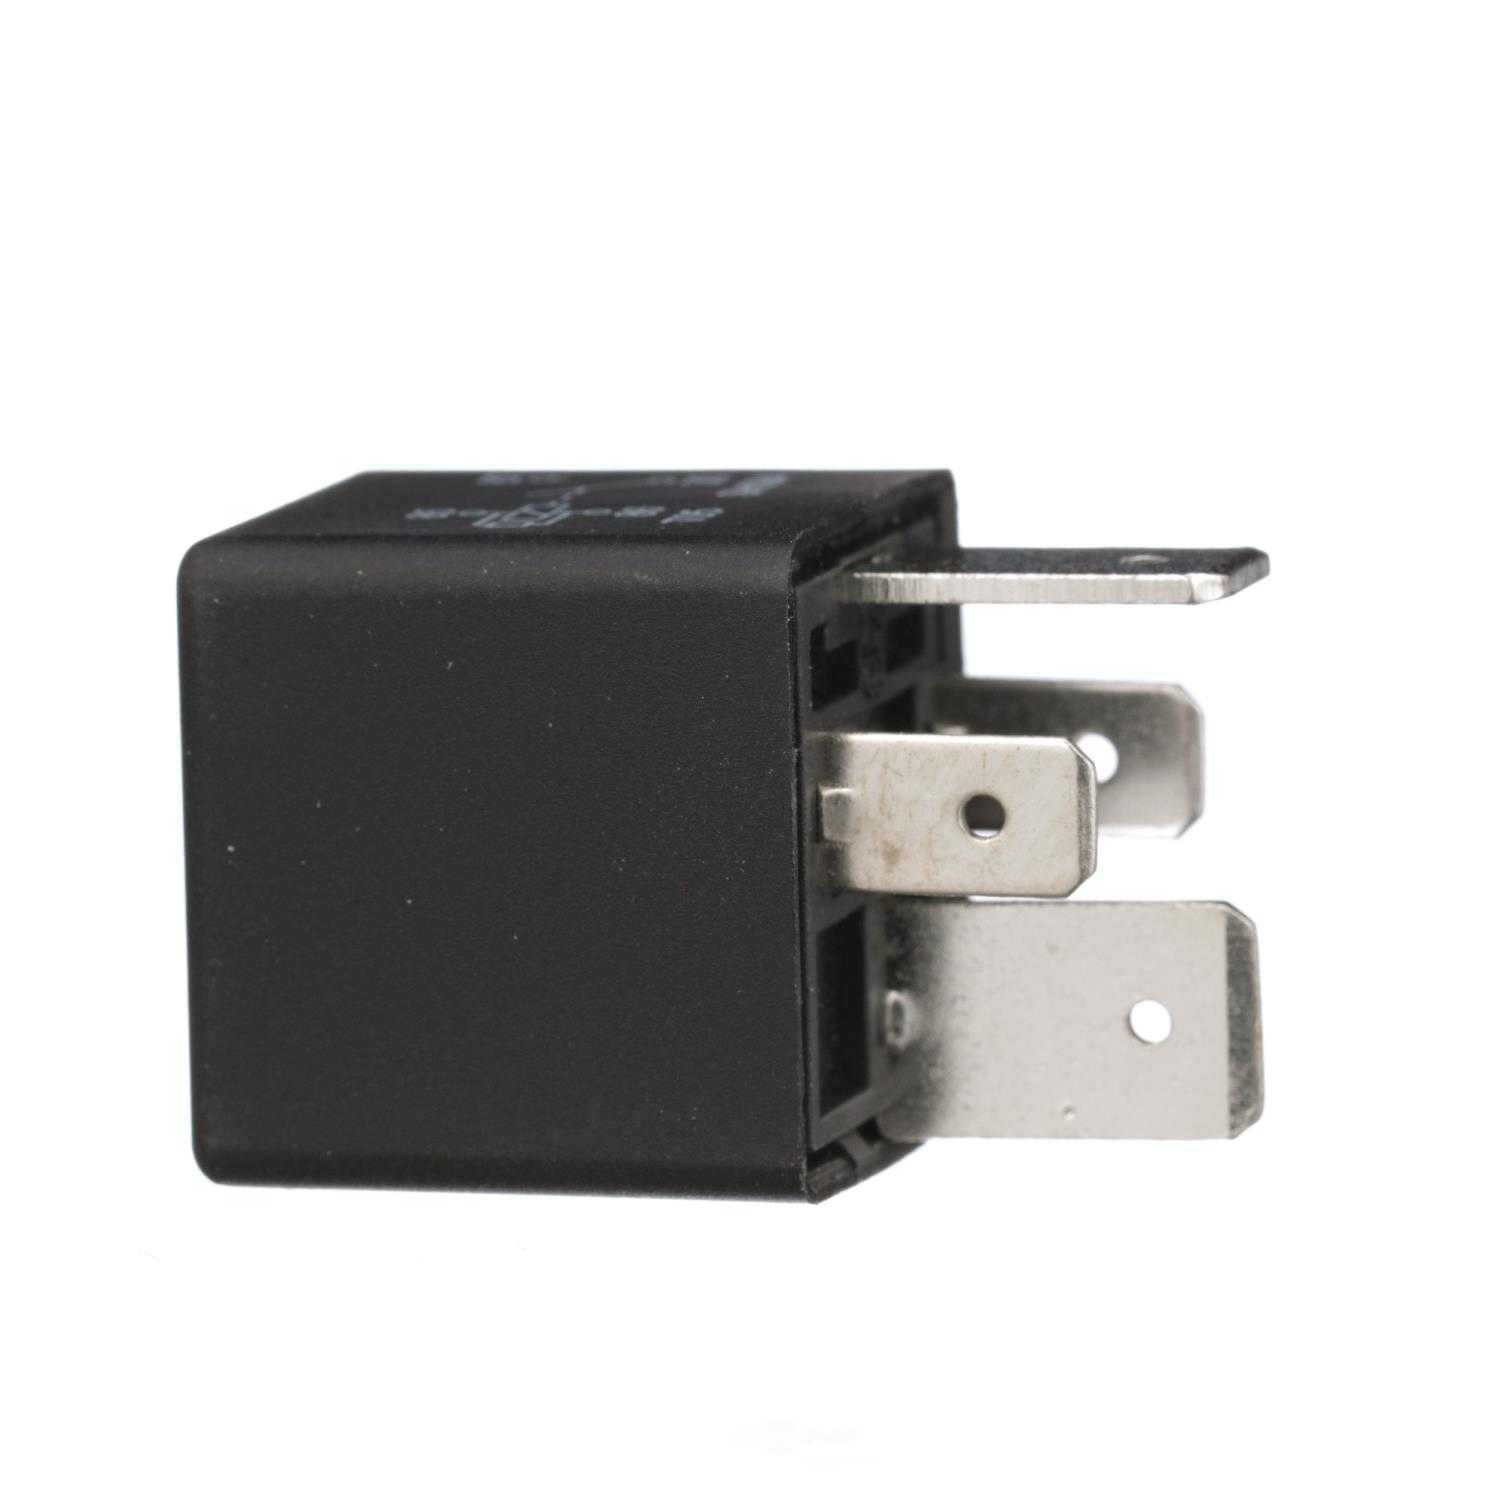 STANDARD MOTOR PRODUCTS - X-Contact Relay - STA RY-255